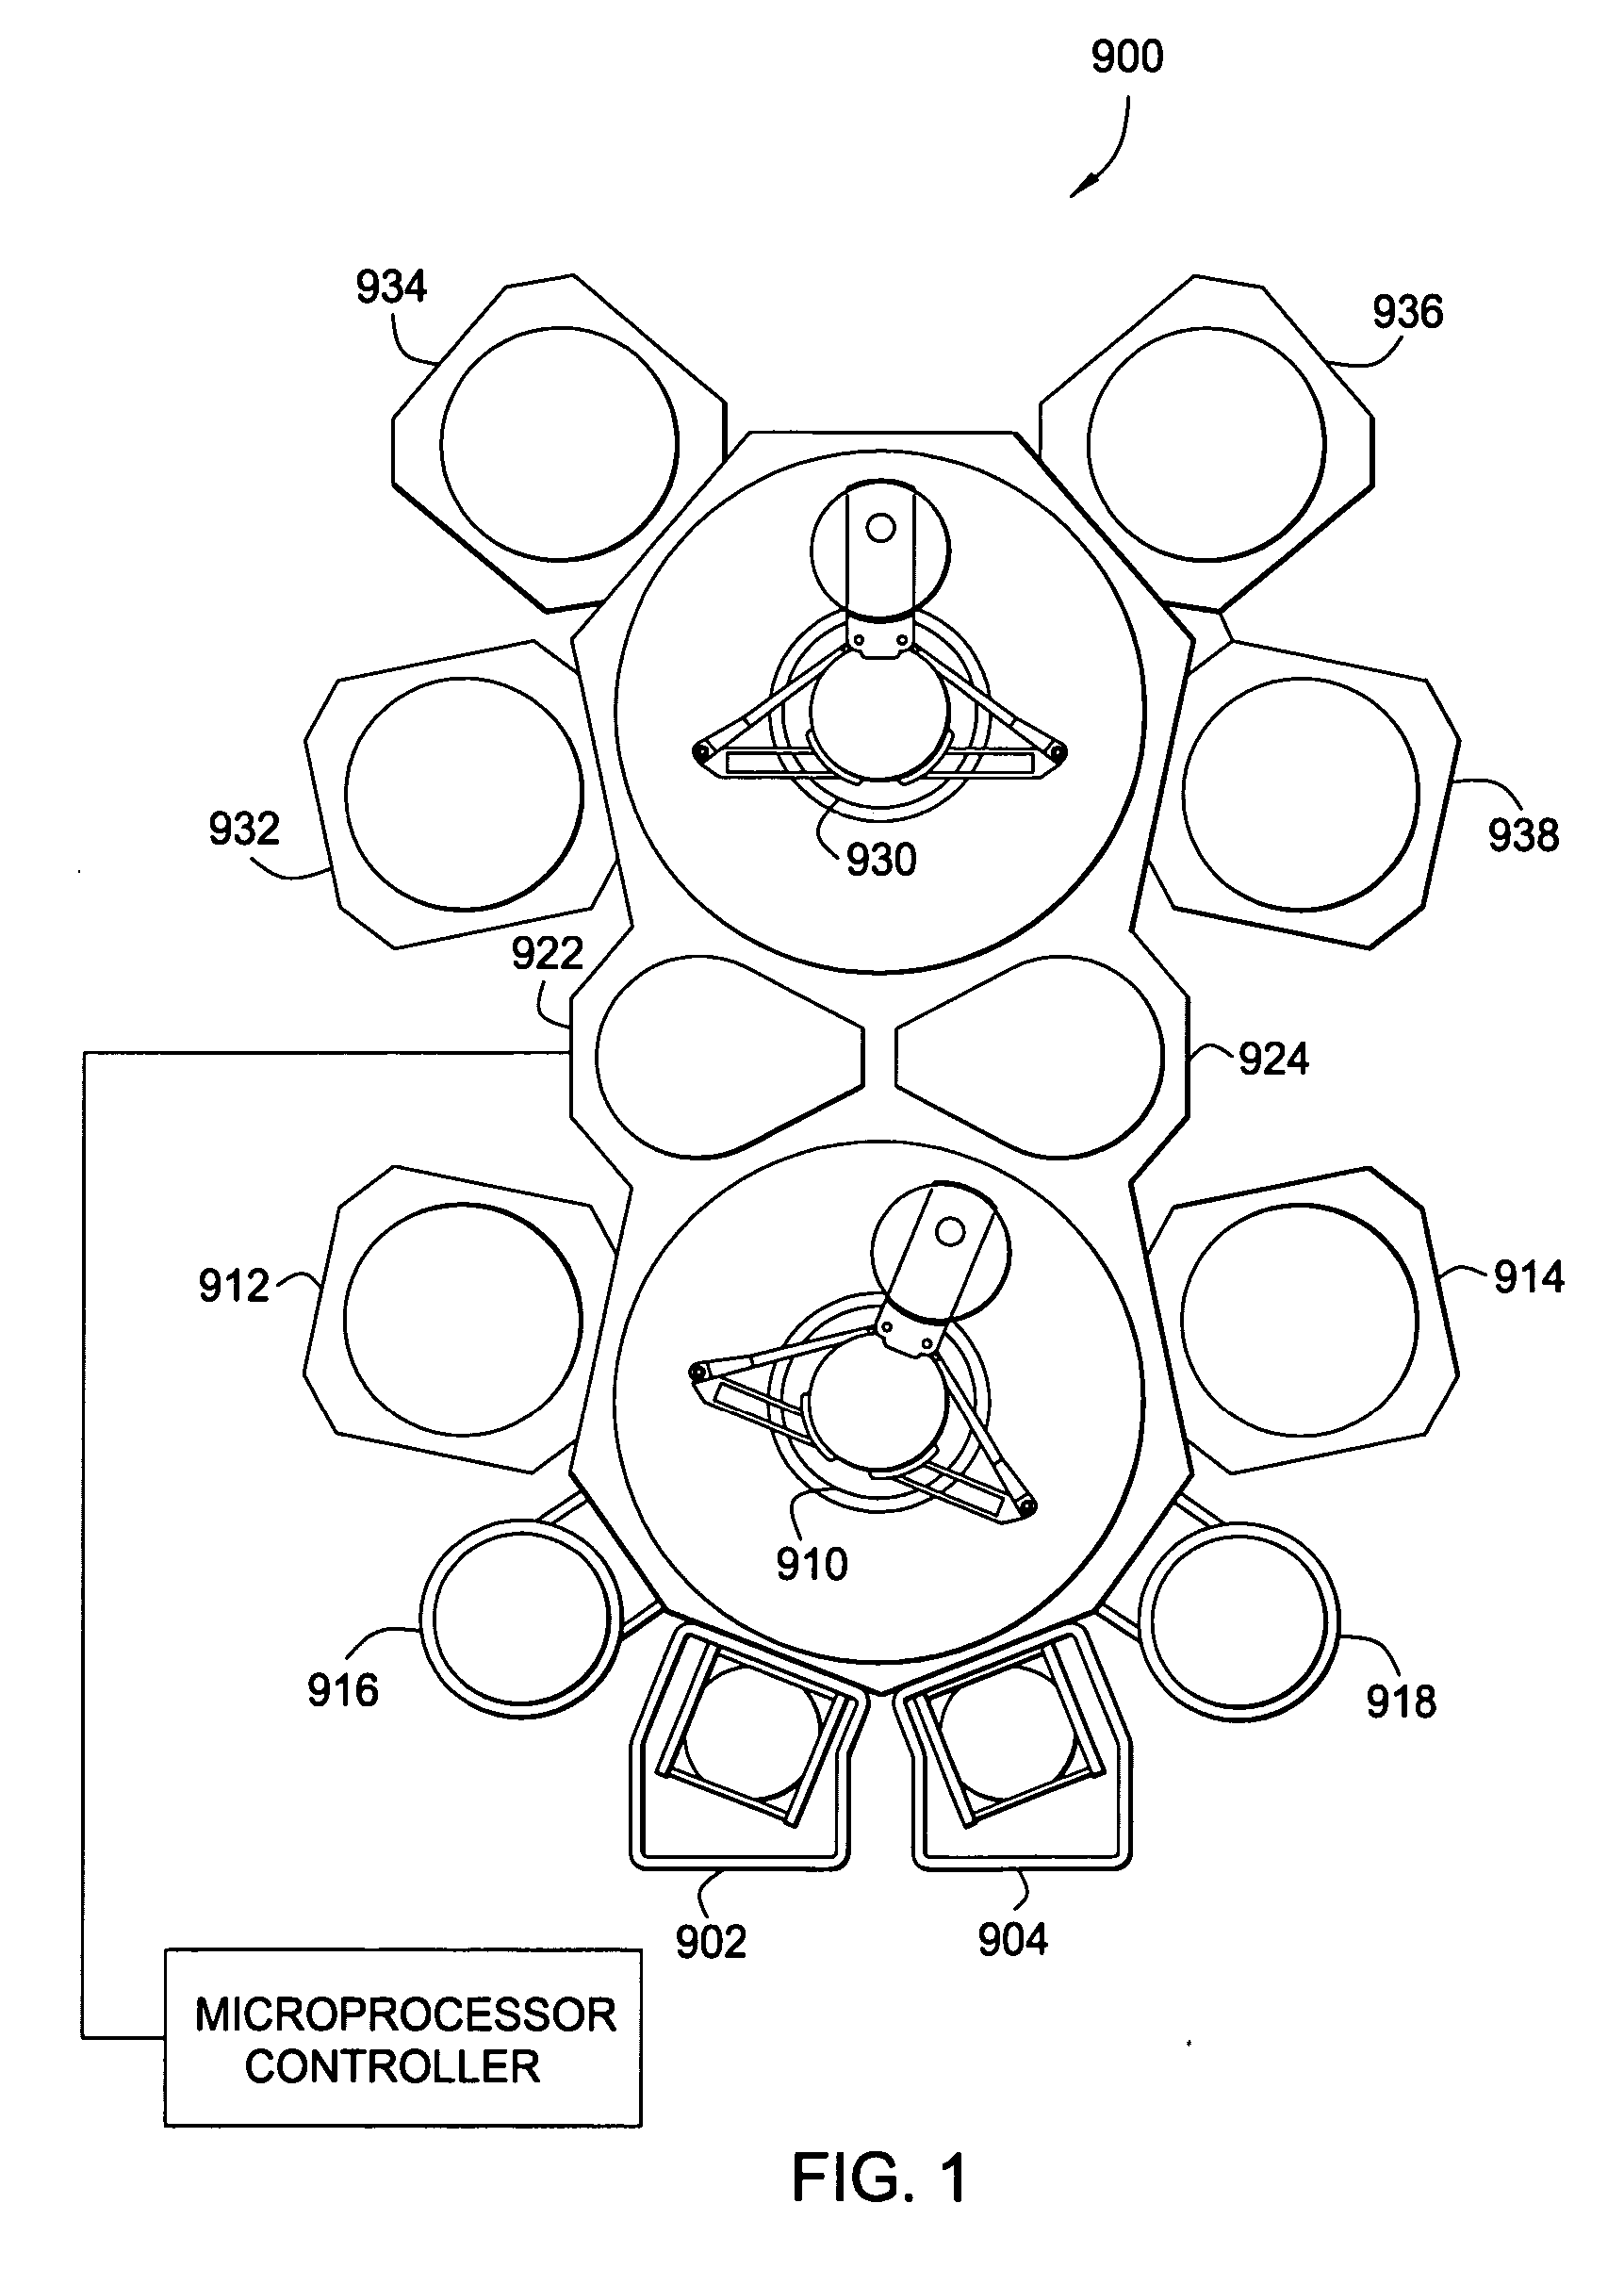 Reduction of copper dewetting by transition metal deposition